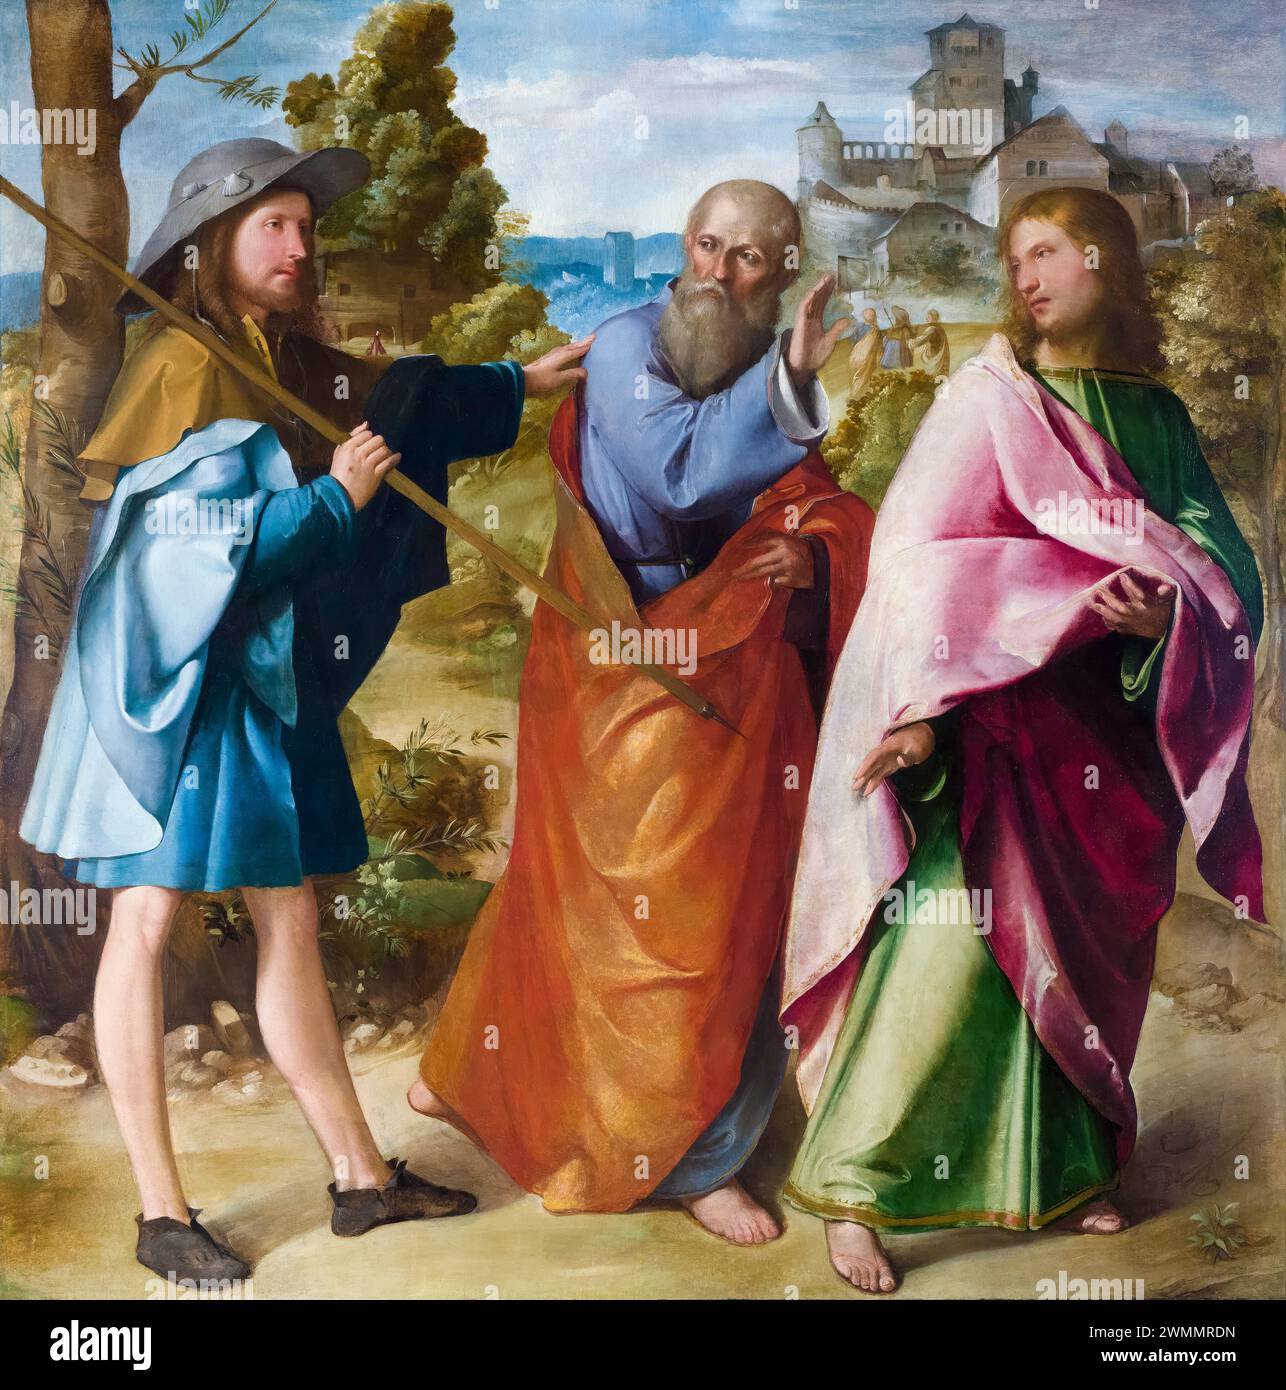 Altobello Melone, The Road to Emmaus, painting in oil on wood, 1516-1517 Stock Photo